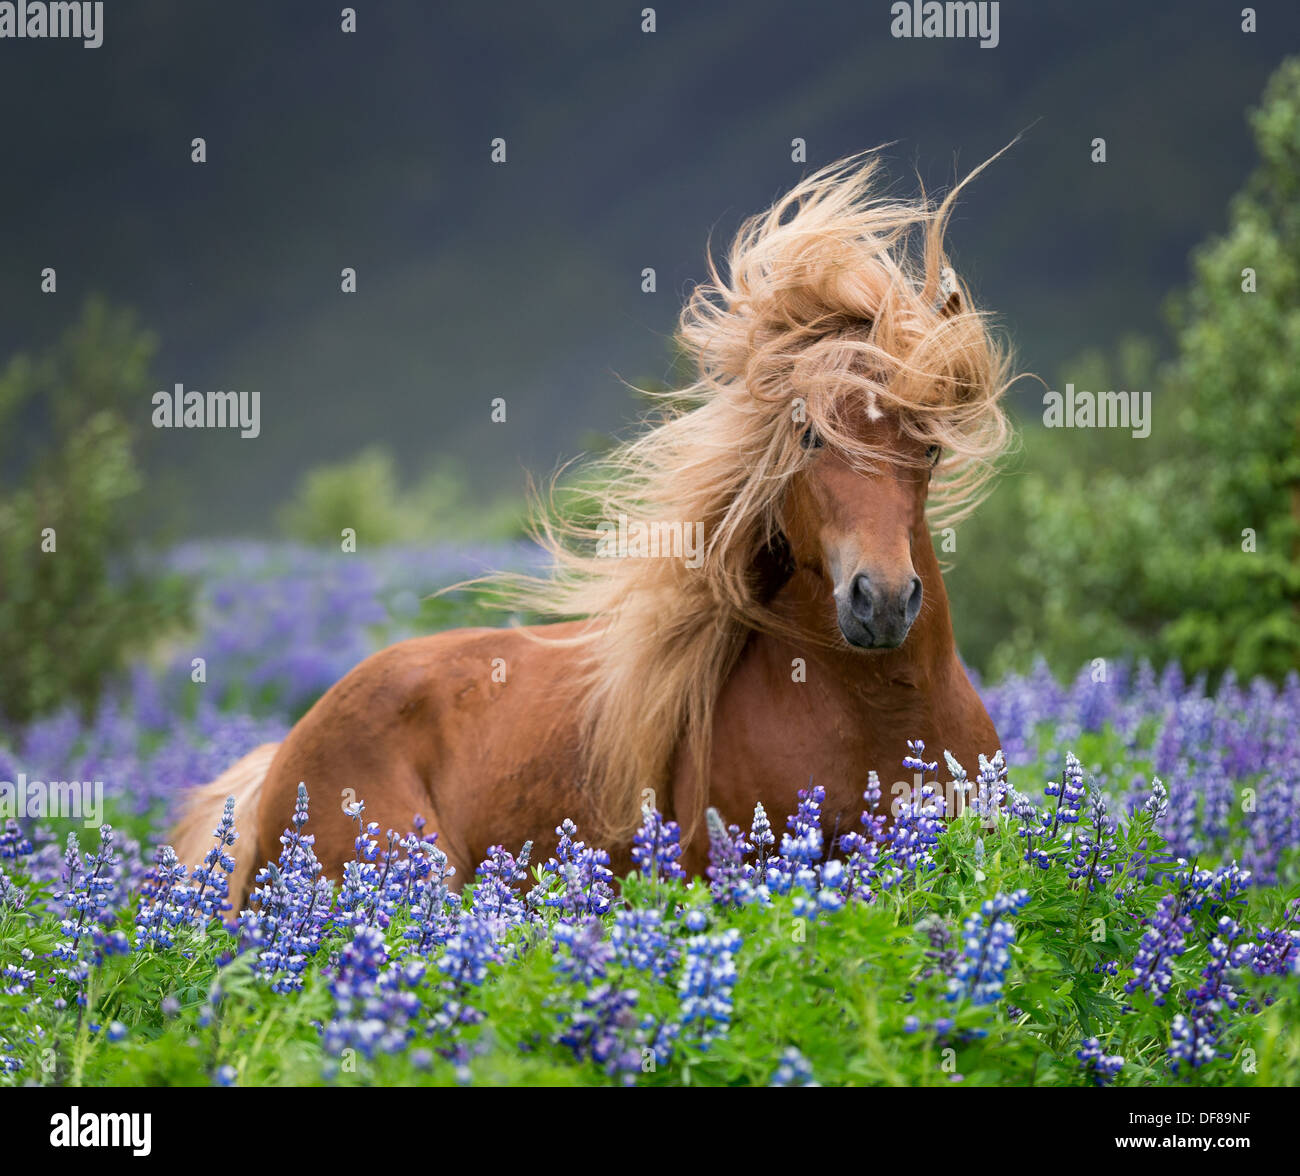 Horse running by lupines. Purebred Icelandic horse in the summertime with blooming lupines, Iceland Stock Photo